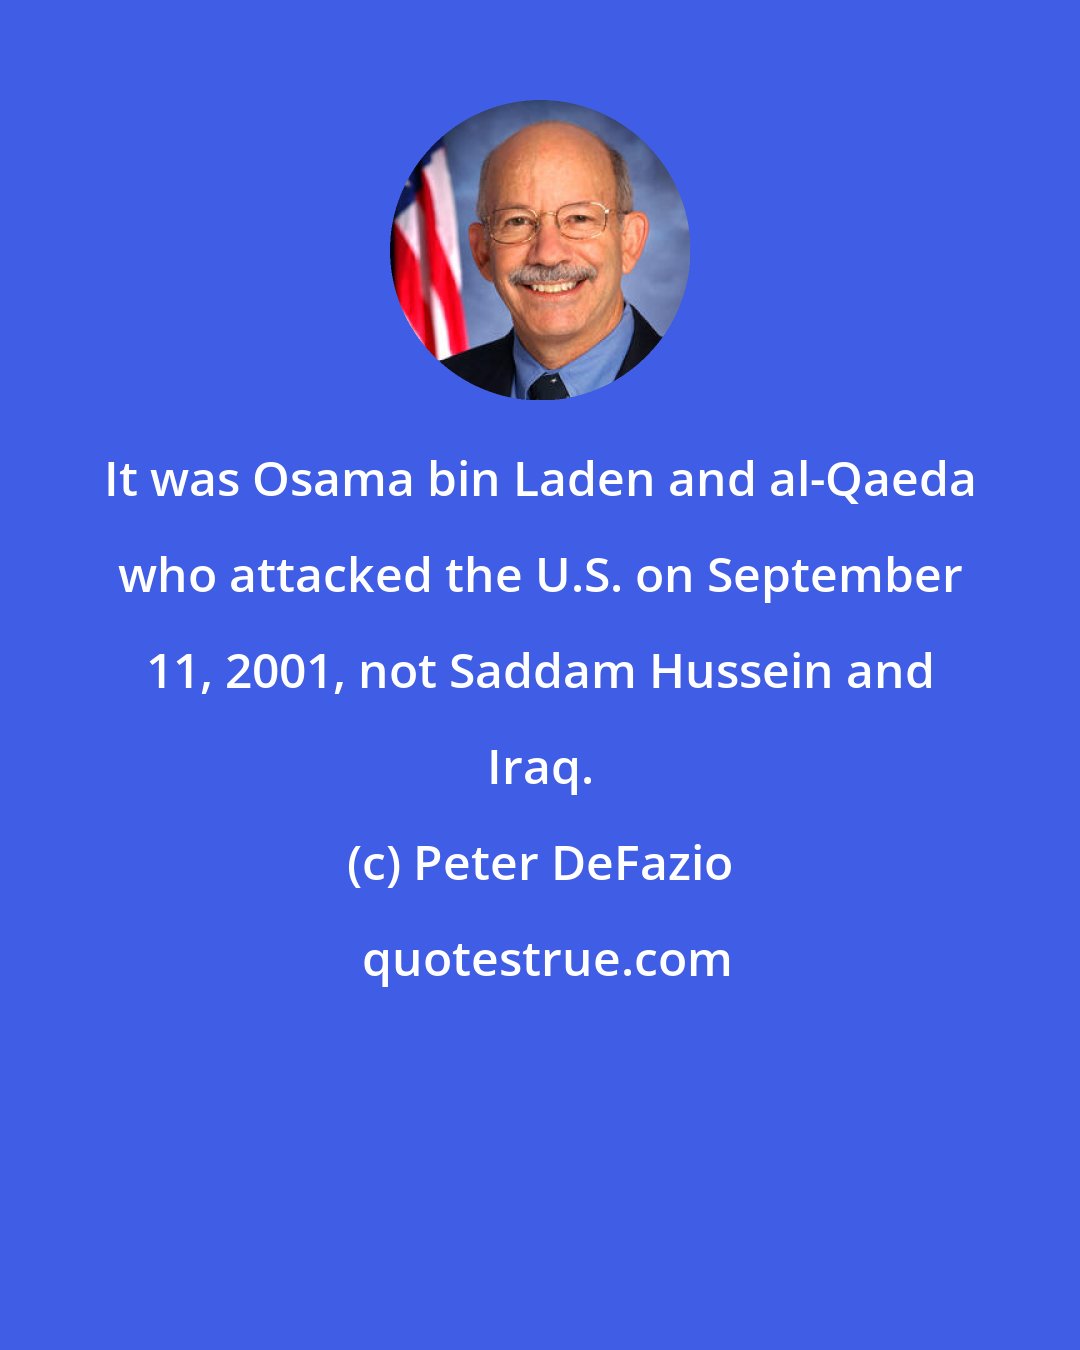 Peter DeFazio: It was Osama bin Laden and al-Qaeda who attacked the U.S. on September 11, 2001, not Saddam Hussein and Iraq.